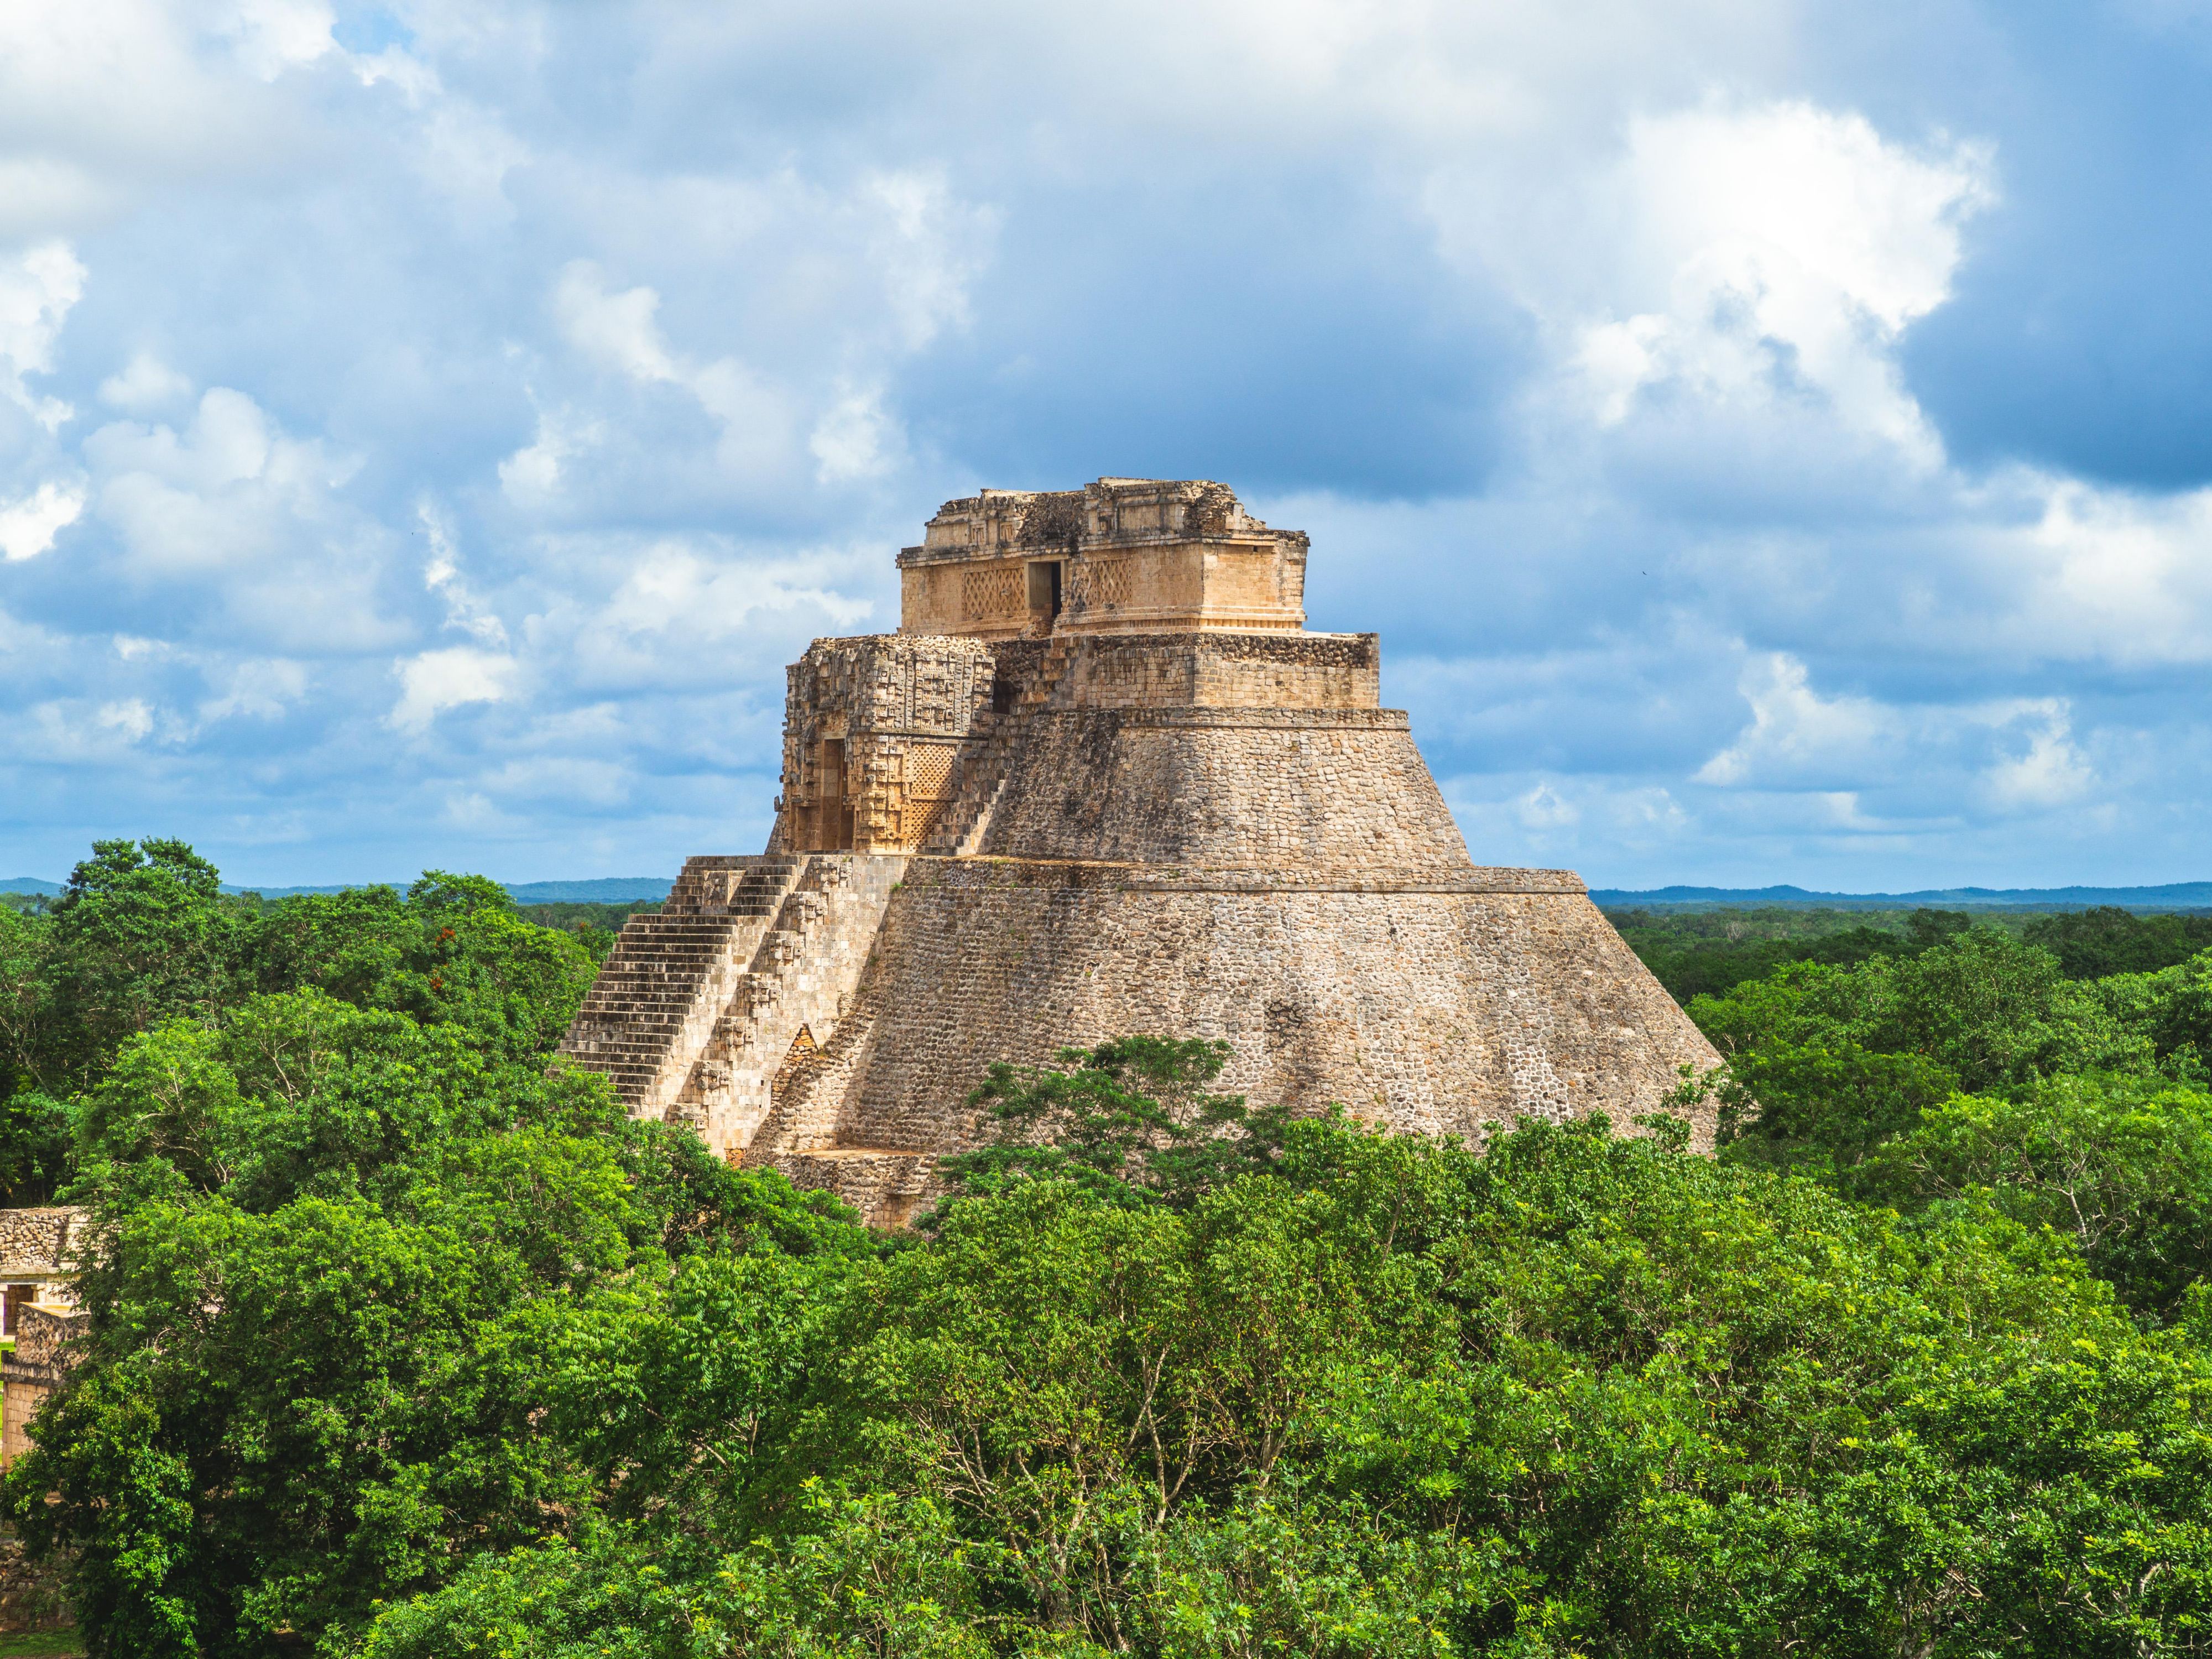 Discover the beauty and history of Mérida from our central downtown location. Our hotel is minutes from the international airport and bustling business district. We’re a quick day trip from some of the most beautiful beaches and most famous archeological sites in the Yucatán, including the Mayan ruins at Chichén-Itzá.